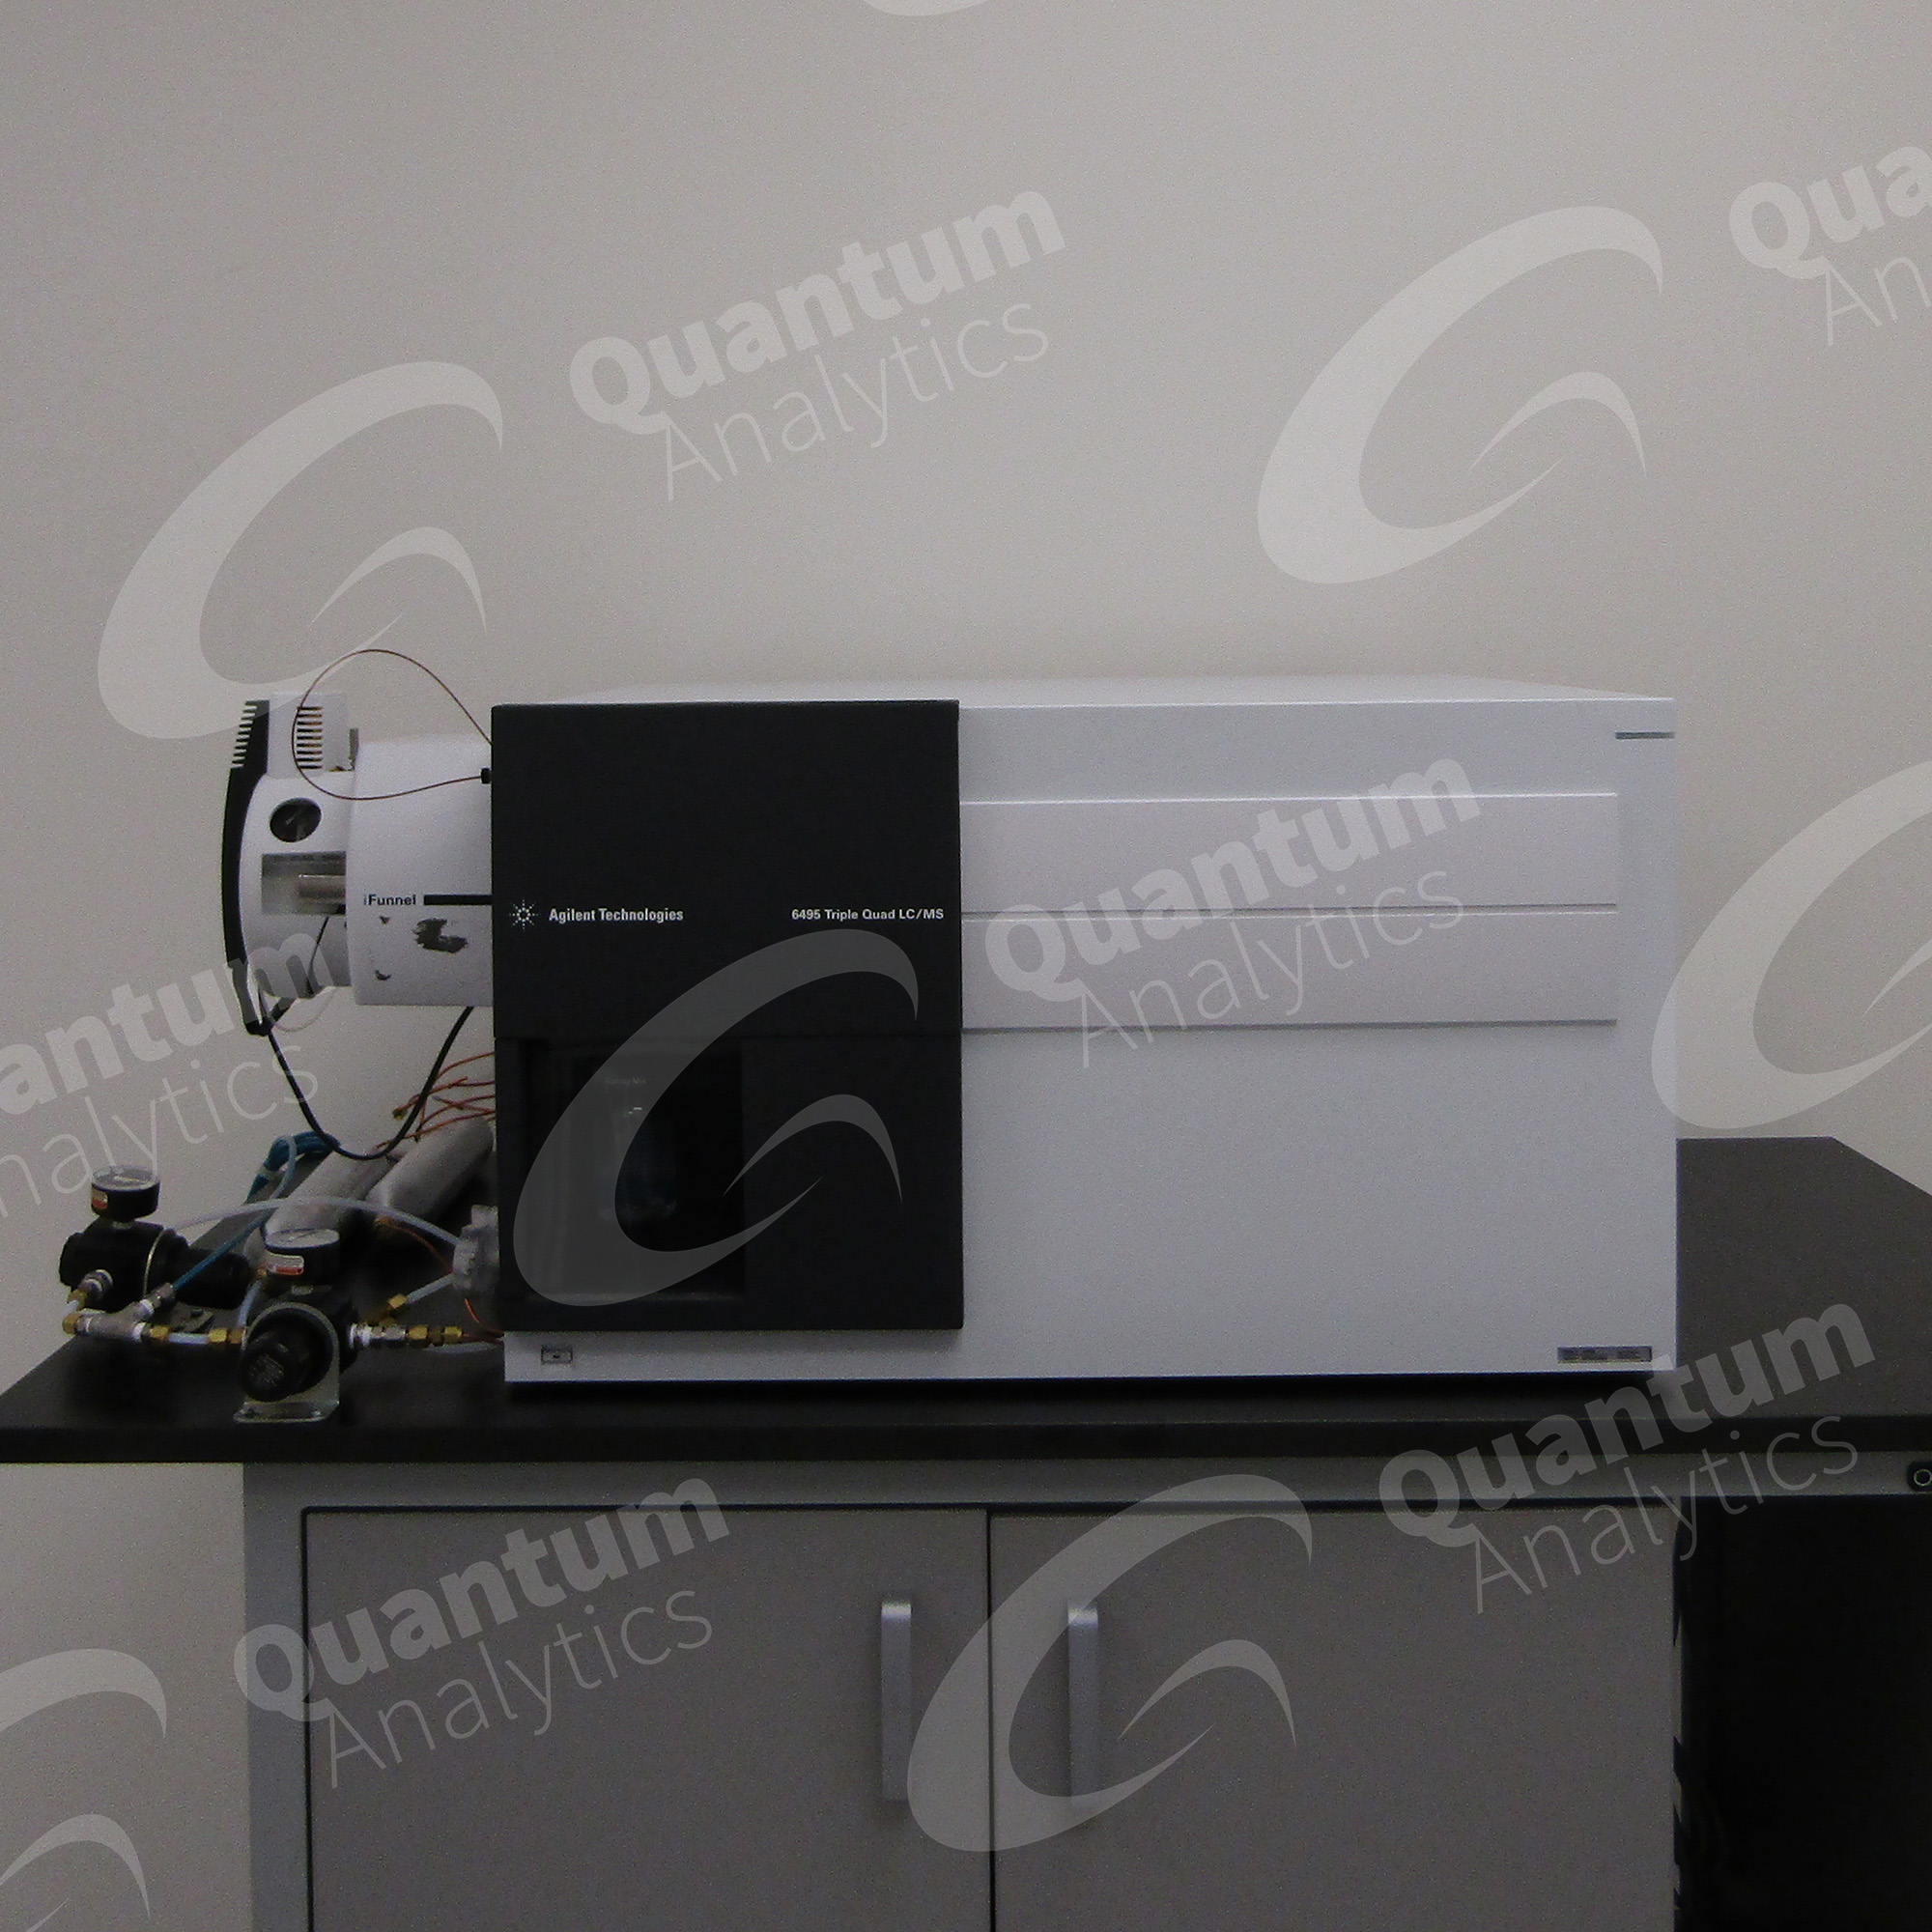 Agilent 6495 Triple Quad LC/MS with iFunnel Technology